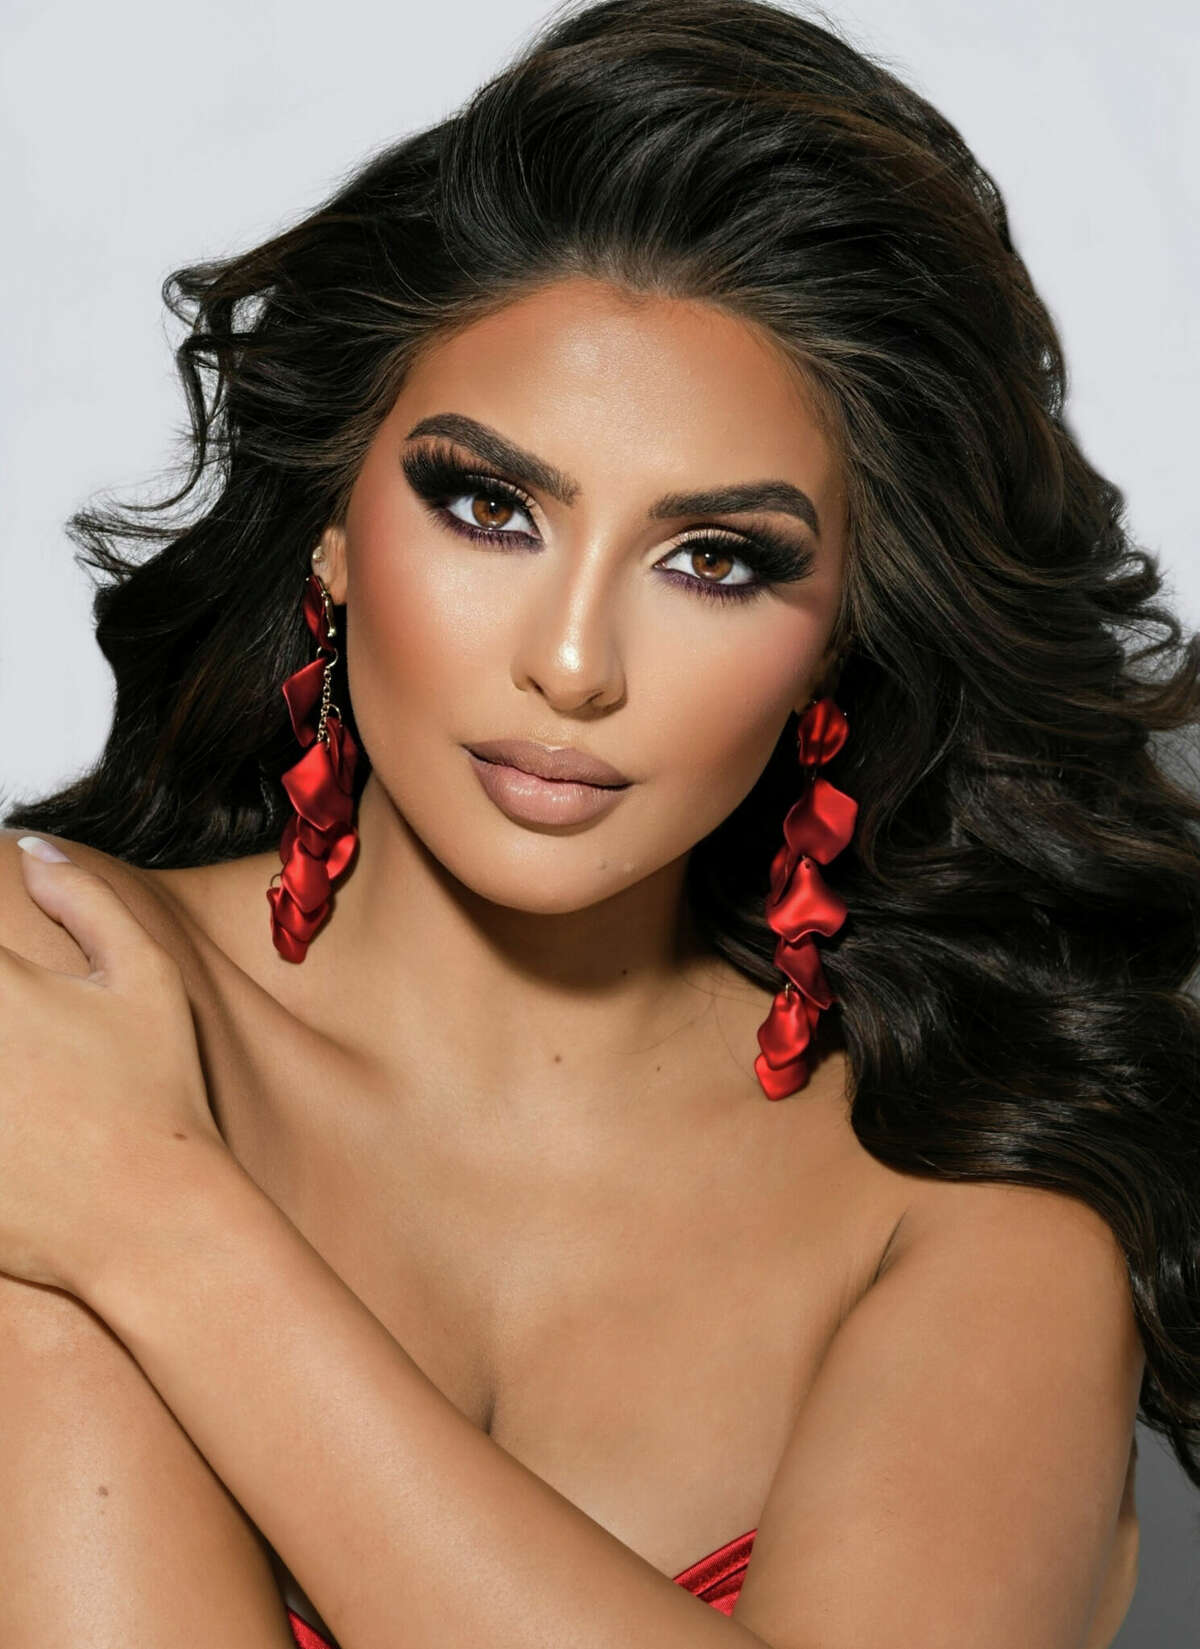 Andrea Hightower represented Galveston County in the Miss Texas USA pageant, where she made the semifinals in July. She is the daughter of Minnie Cortez of League City and Gregory Hightower, who lives in Webster.